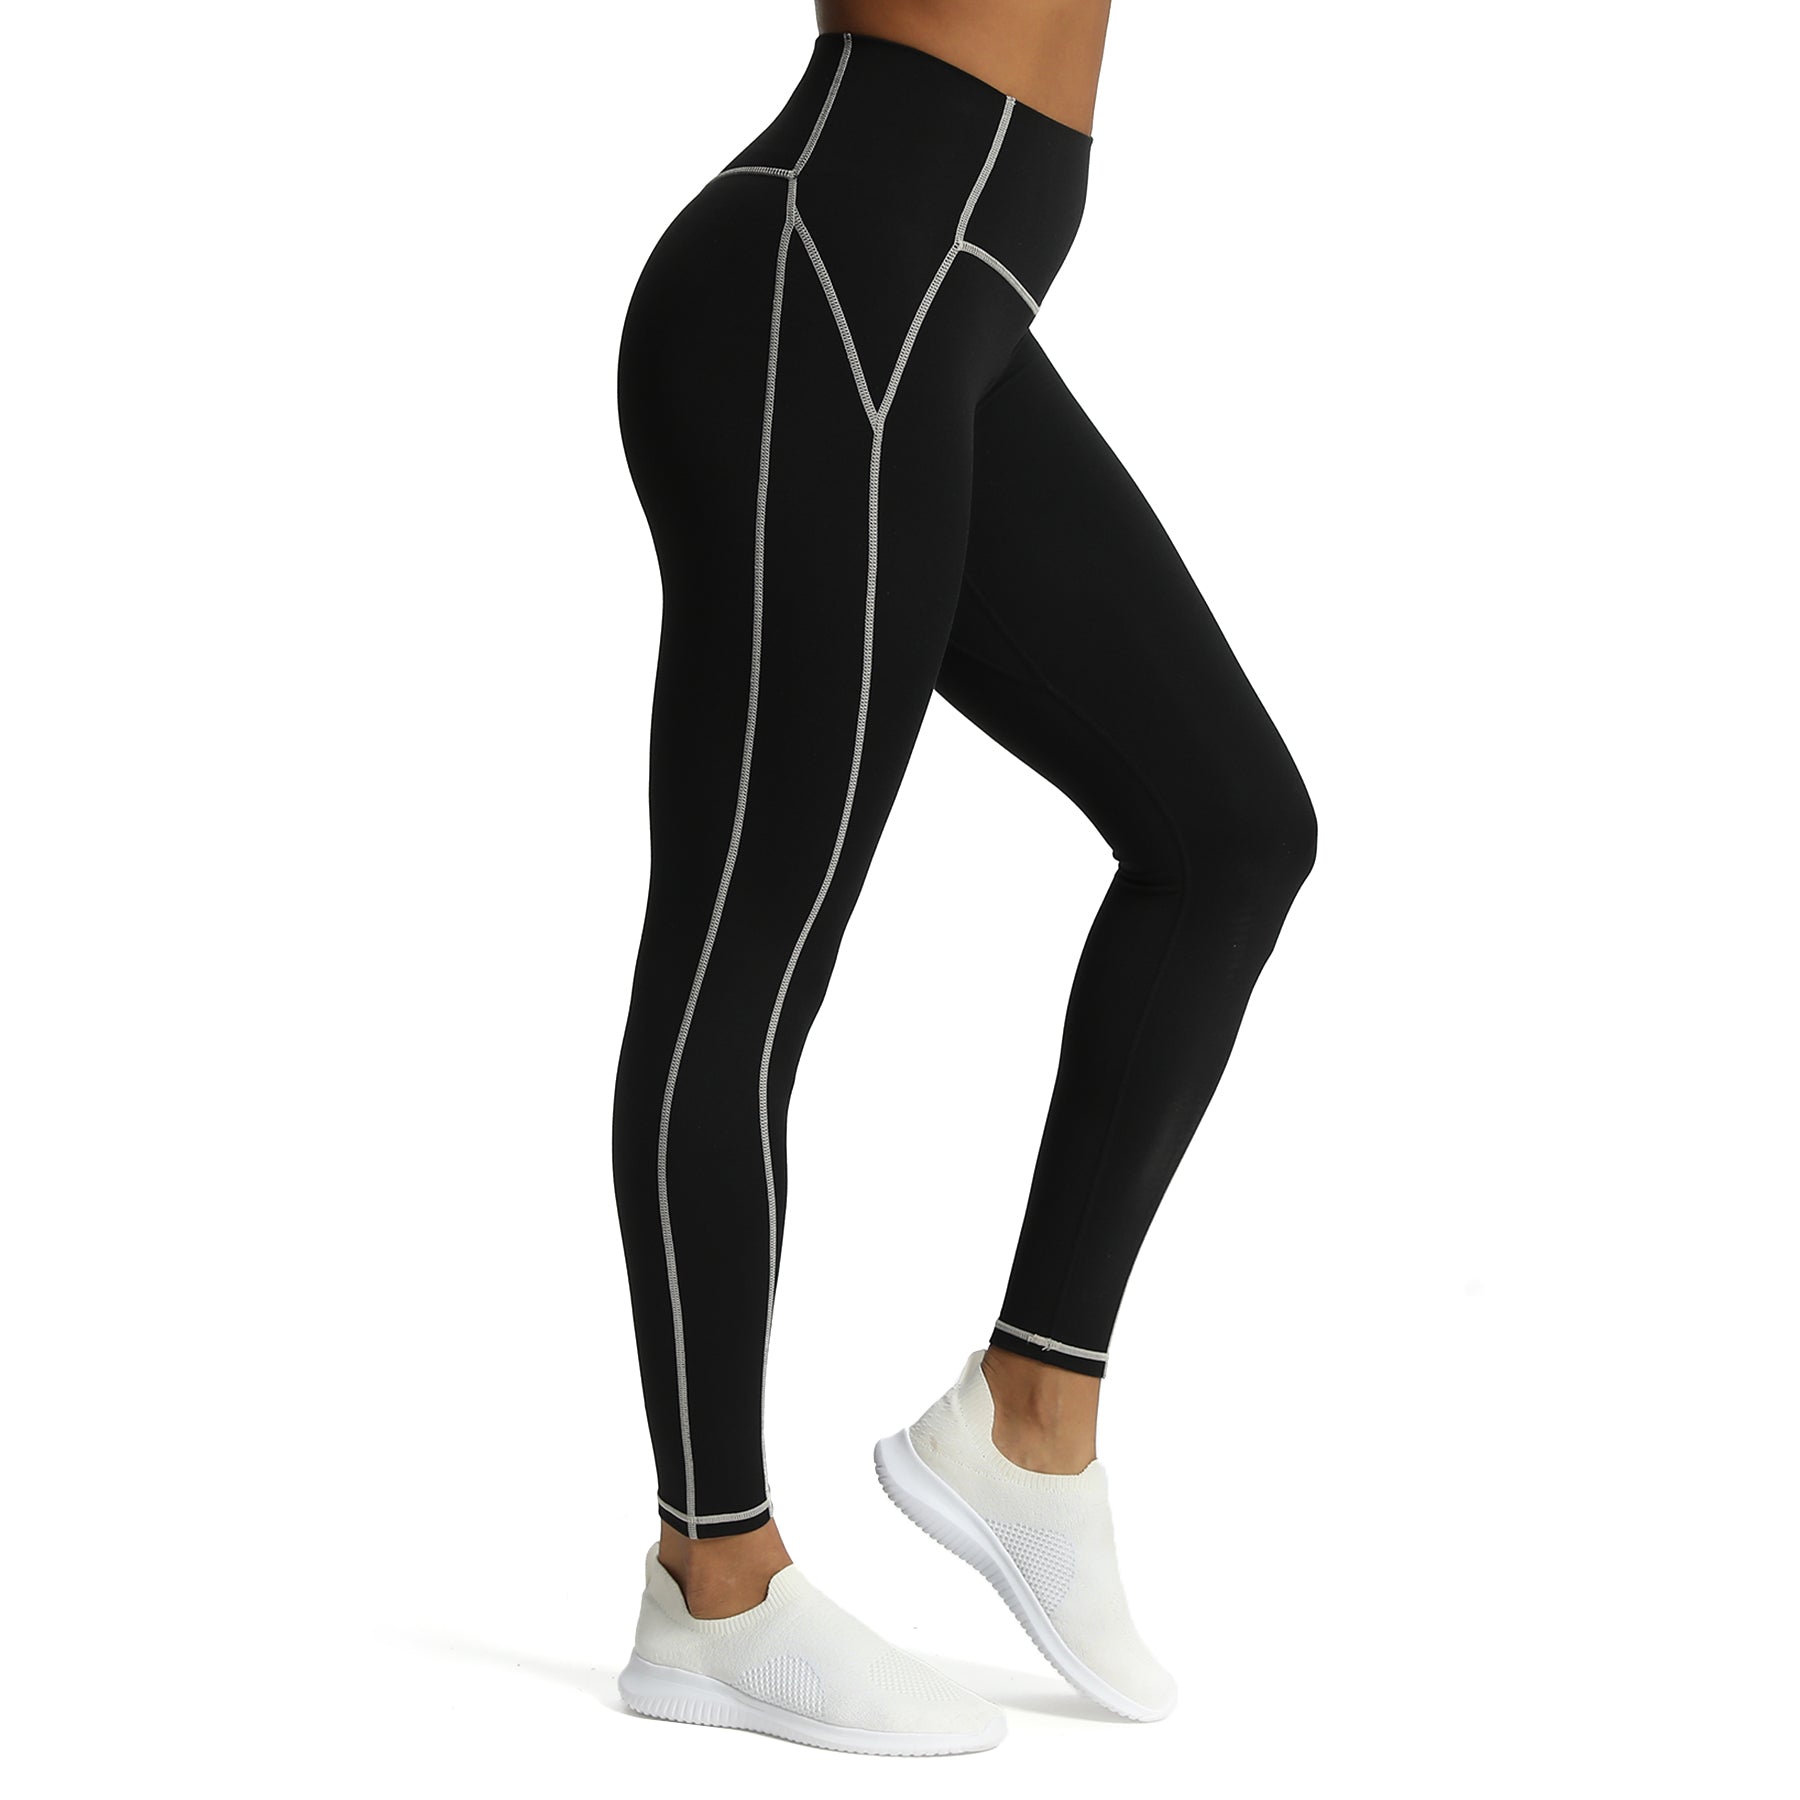 Aoxjox "Lexi Lined" Leggings